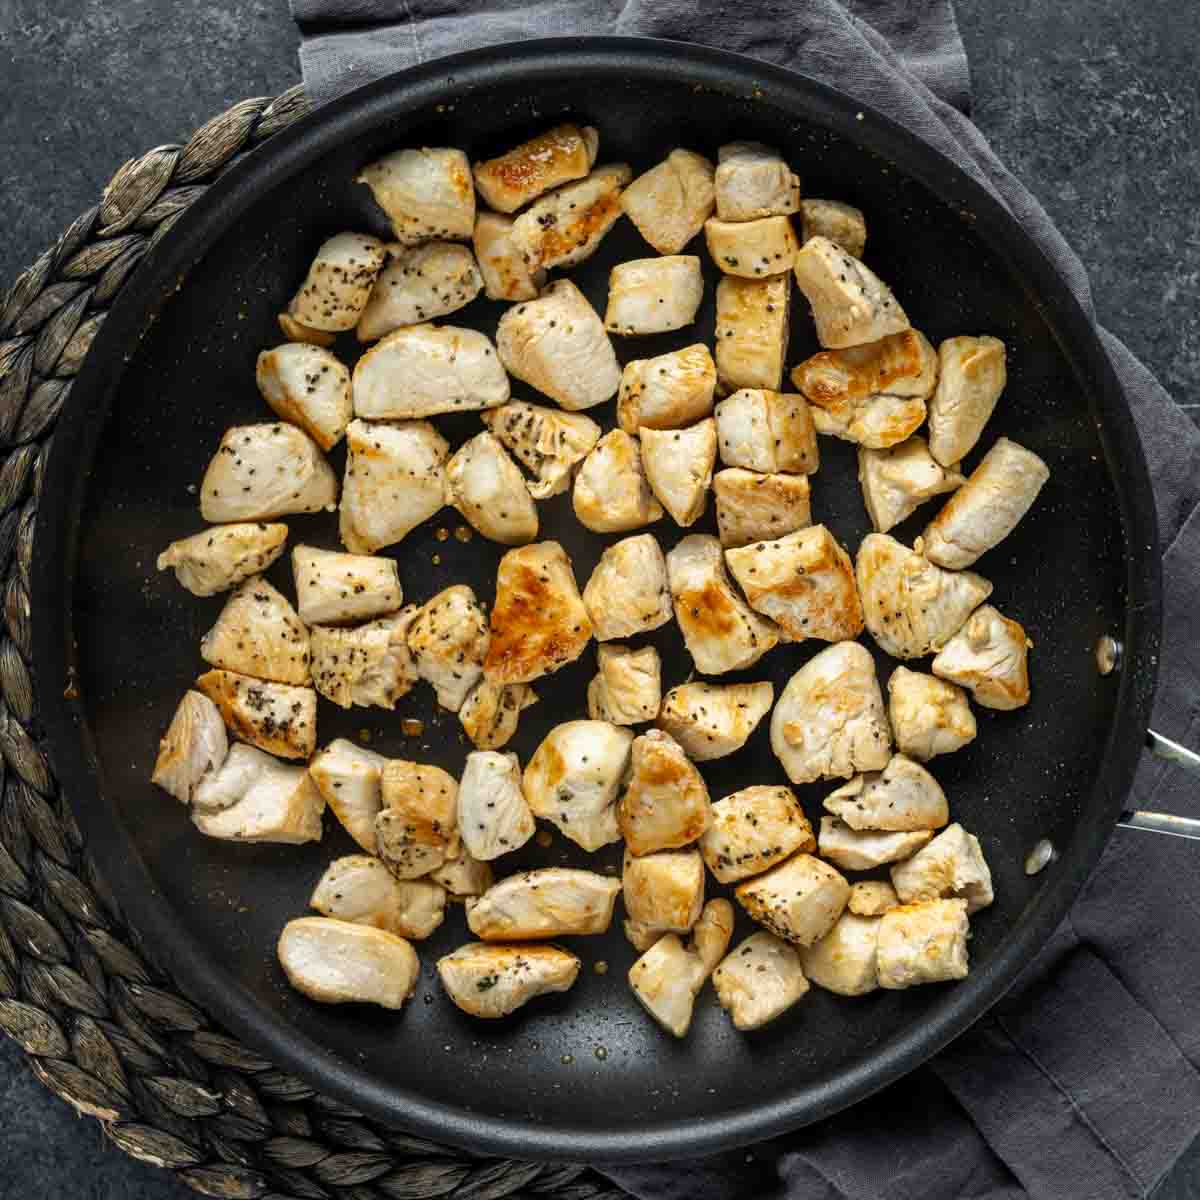 Diced chicken breast pieces being cooked in a frying pan for Chicken Florentine Casserole